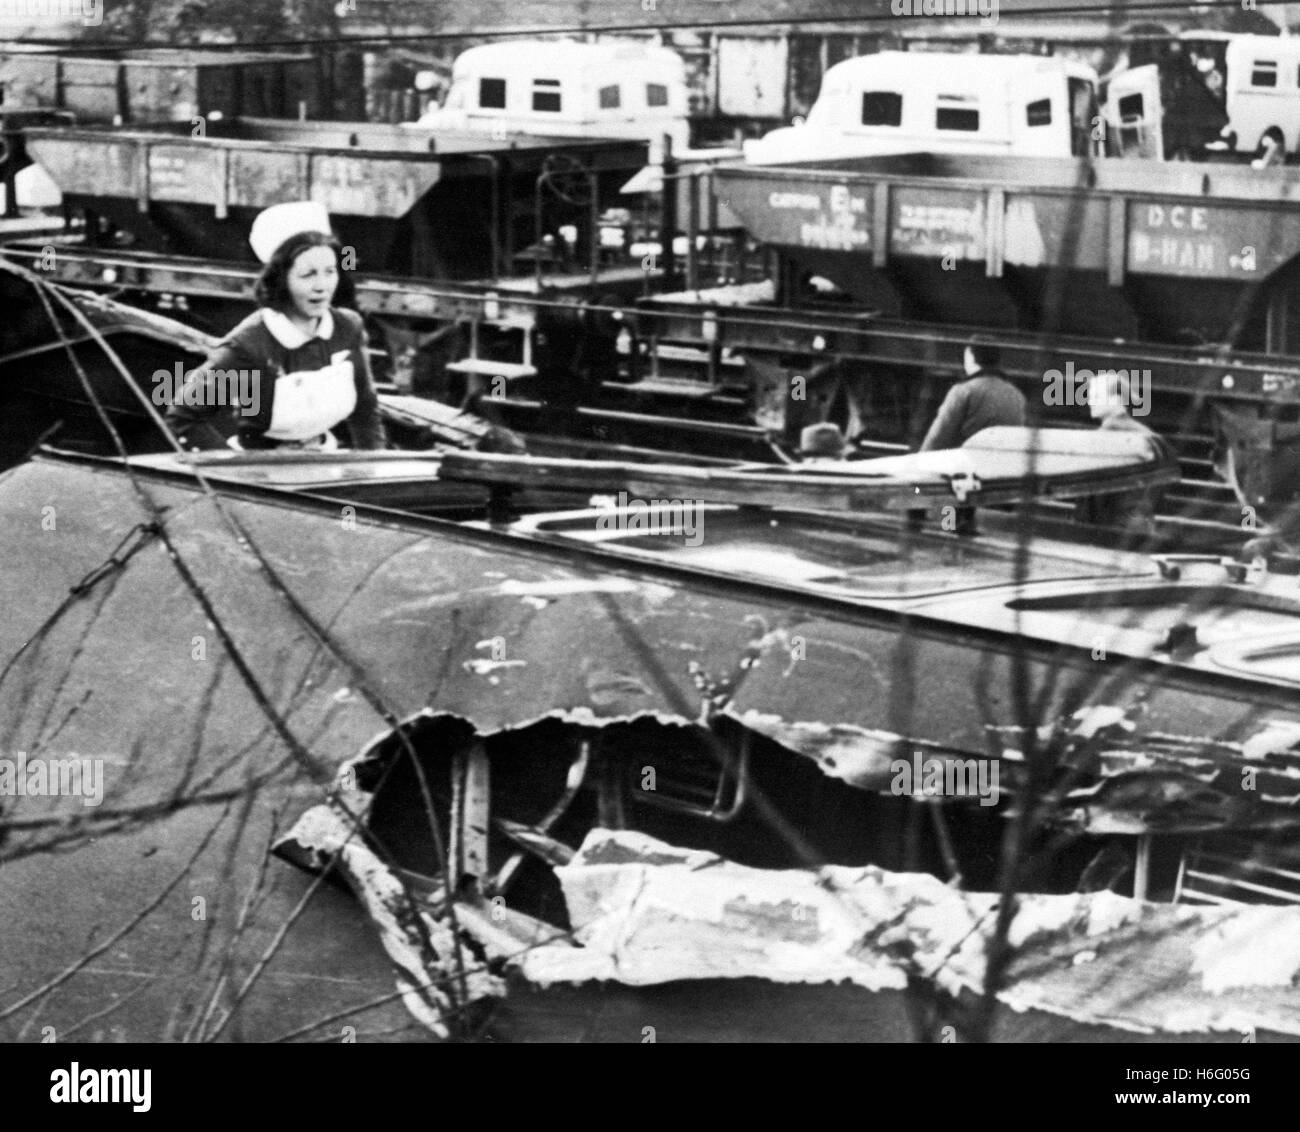 A nurse clambers over a wrecked coach during  rescue operations at Stechford railway station in Birmingham. Eight people were killed and 10 injured when a four-car passenger train was in collision with a Diesel locomotive. Stock Photo